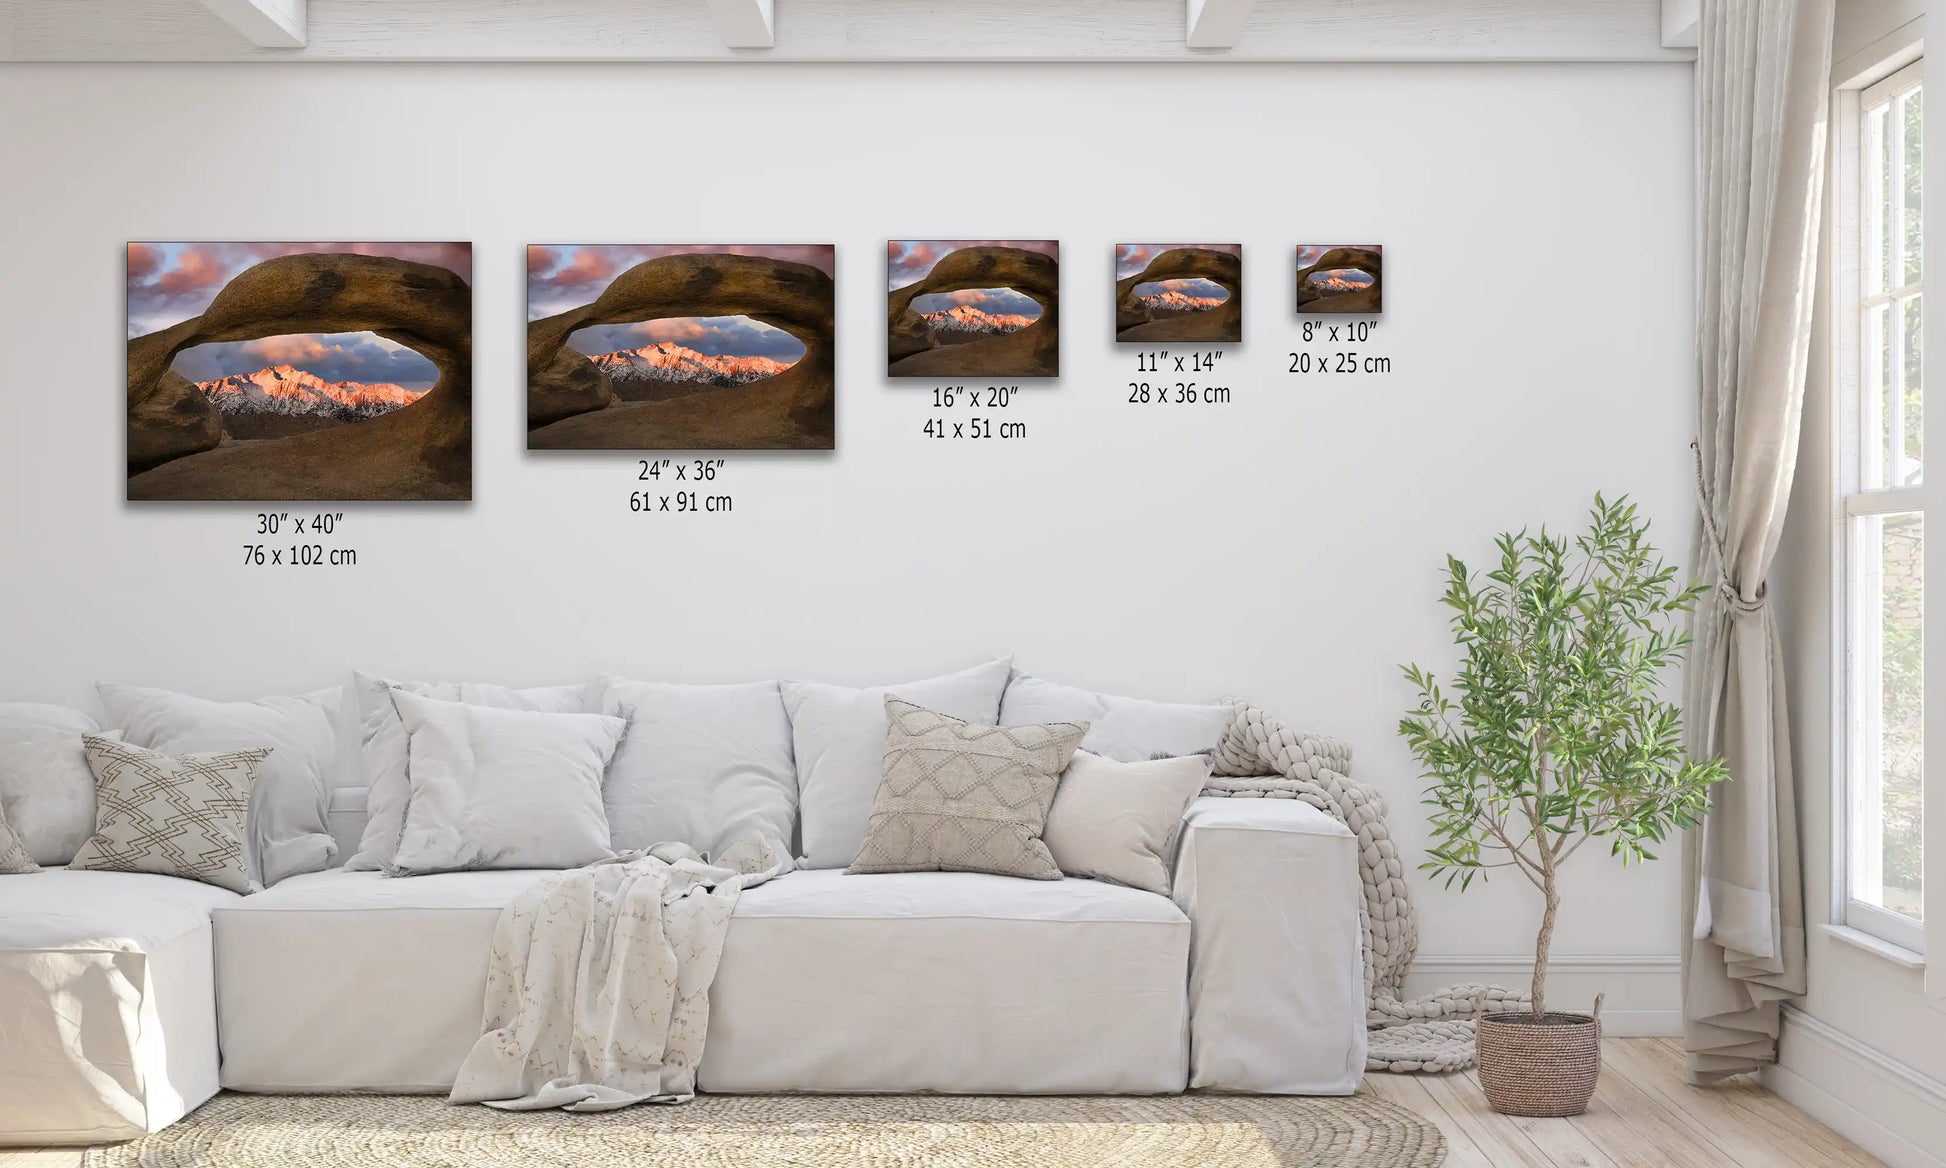 Various sized canvas prints showing Lone Pine Peak through Mobius Arch, Alabama Hills, against a white couch for scale comparison.